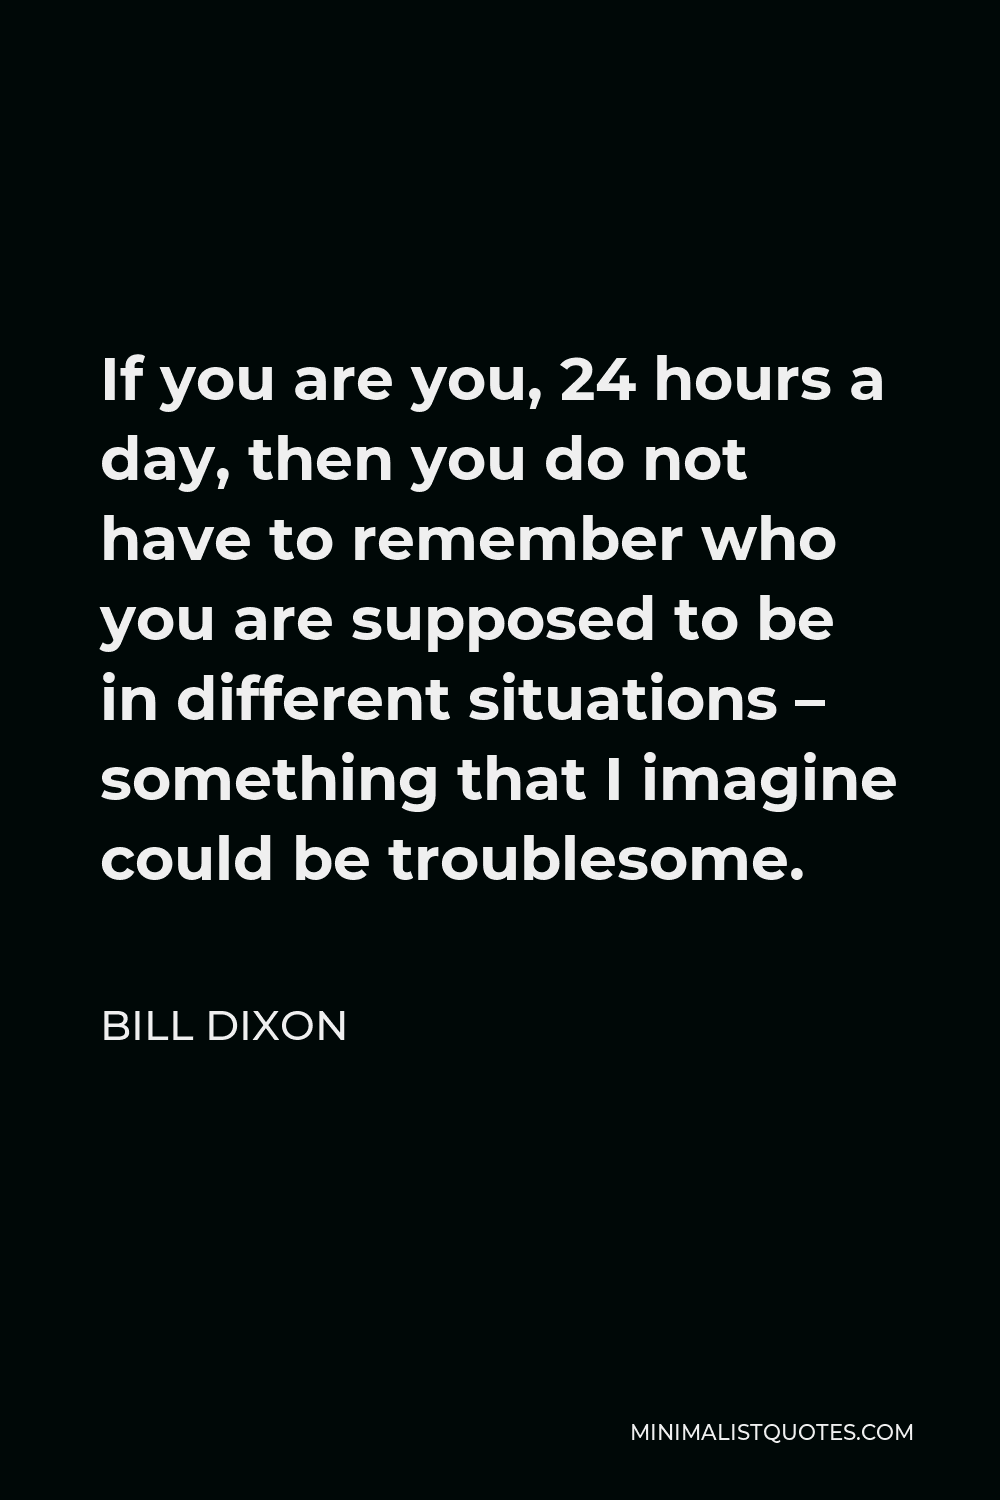 Bill Dixon Quote - If you are you, 24 hours a day, then you do not have to remember who you are supposed to be in different situations – something that I imagine could be troublesome.